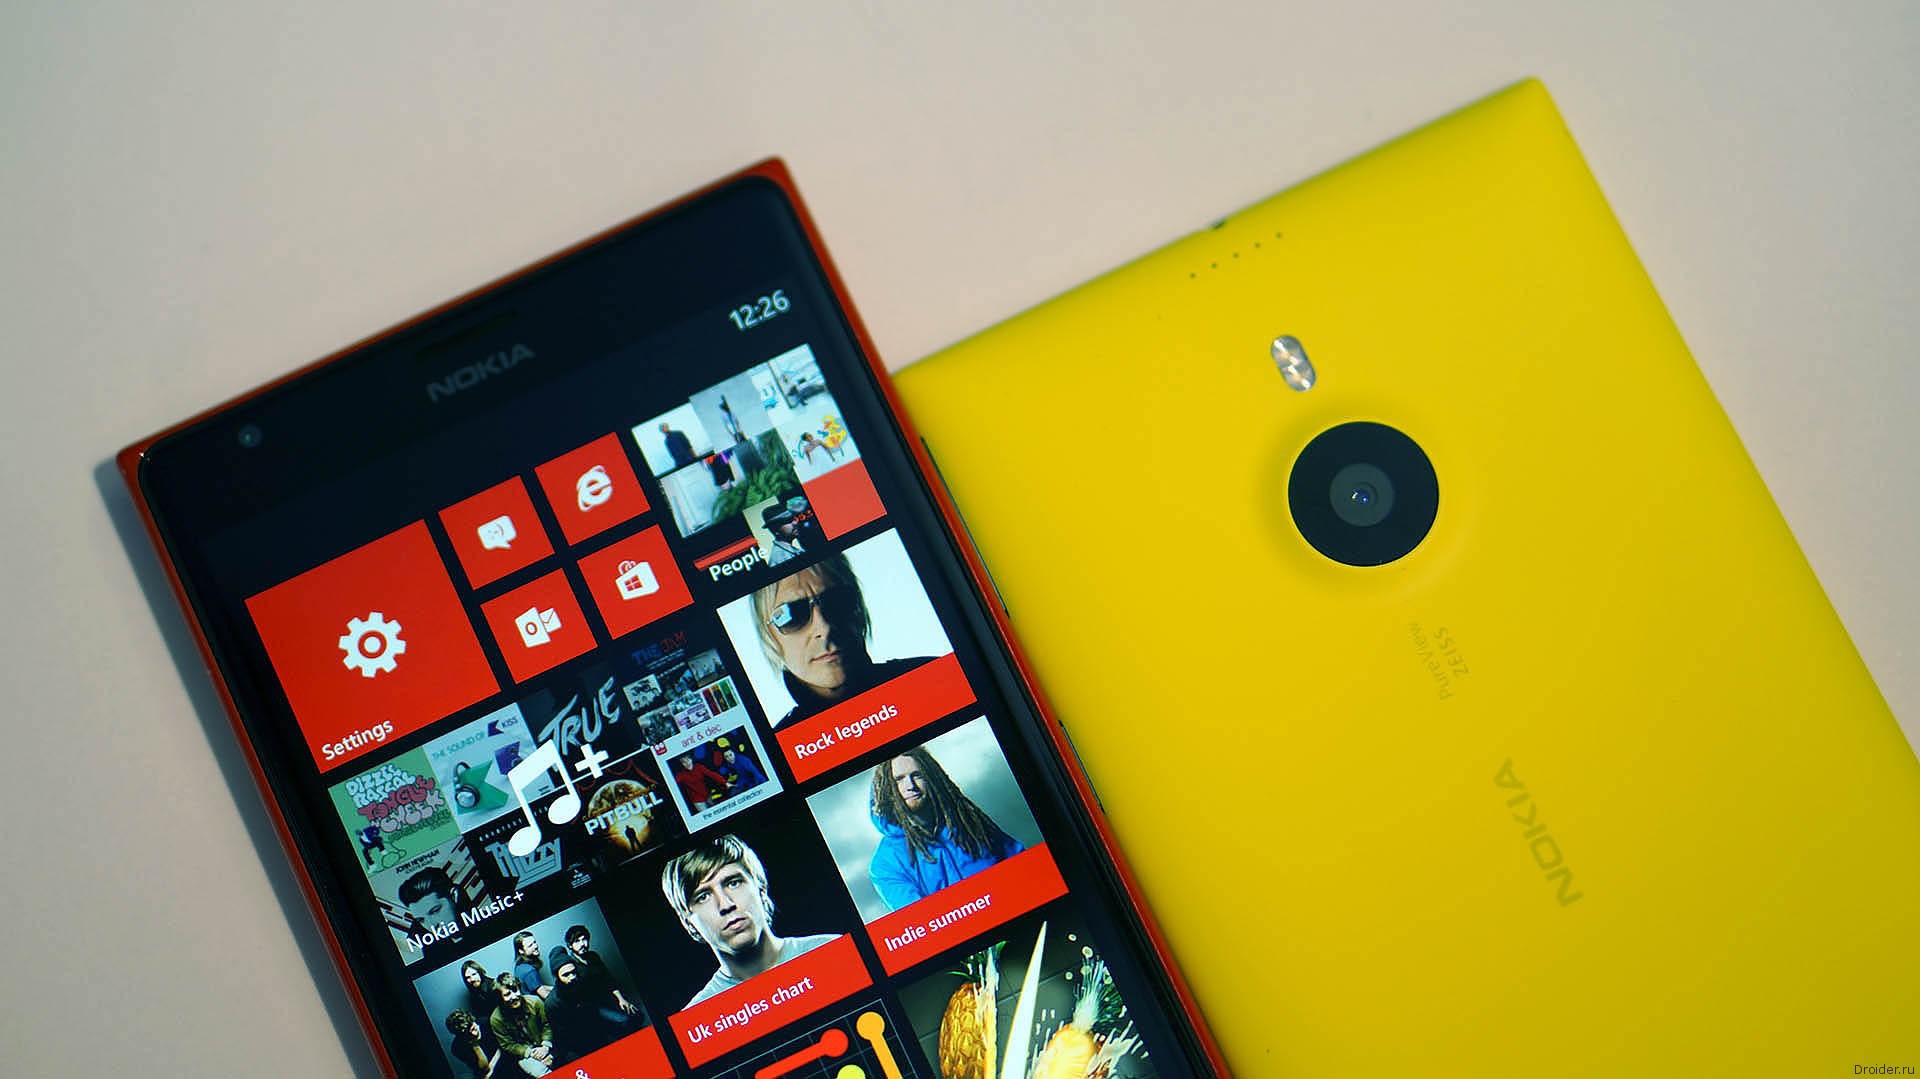 The New Nokia Lumia Phablet Wallpaper And Image